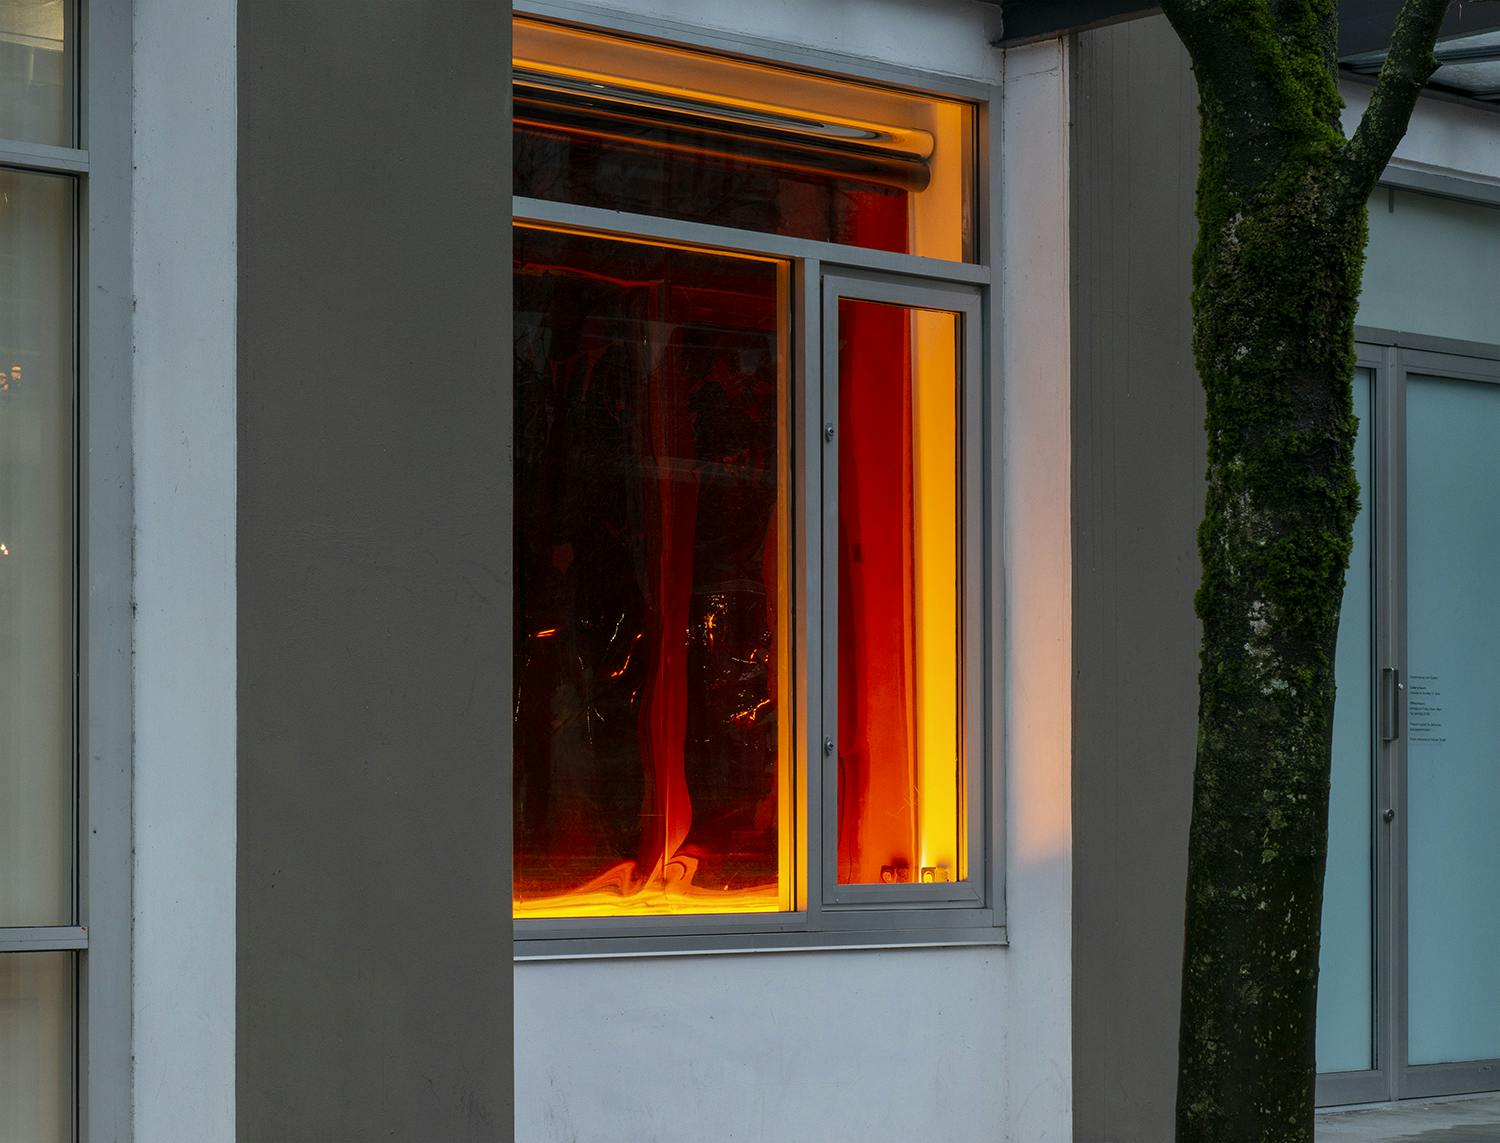 Detail shot of the exterior of the Contemporary Art Gallery displaying the work of Nicole Kelly Westman in a window. One window on the first floor is lit from the bottom displaying a red backdrop.